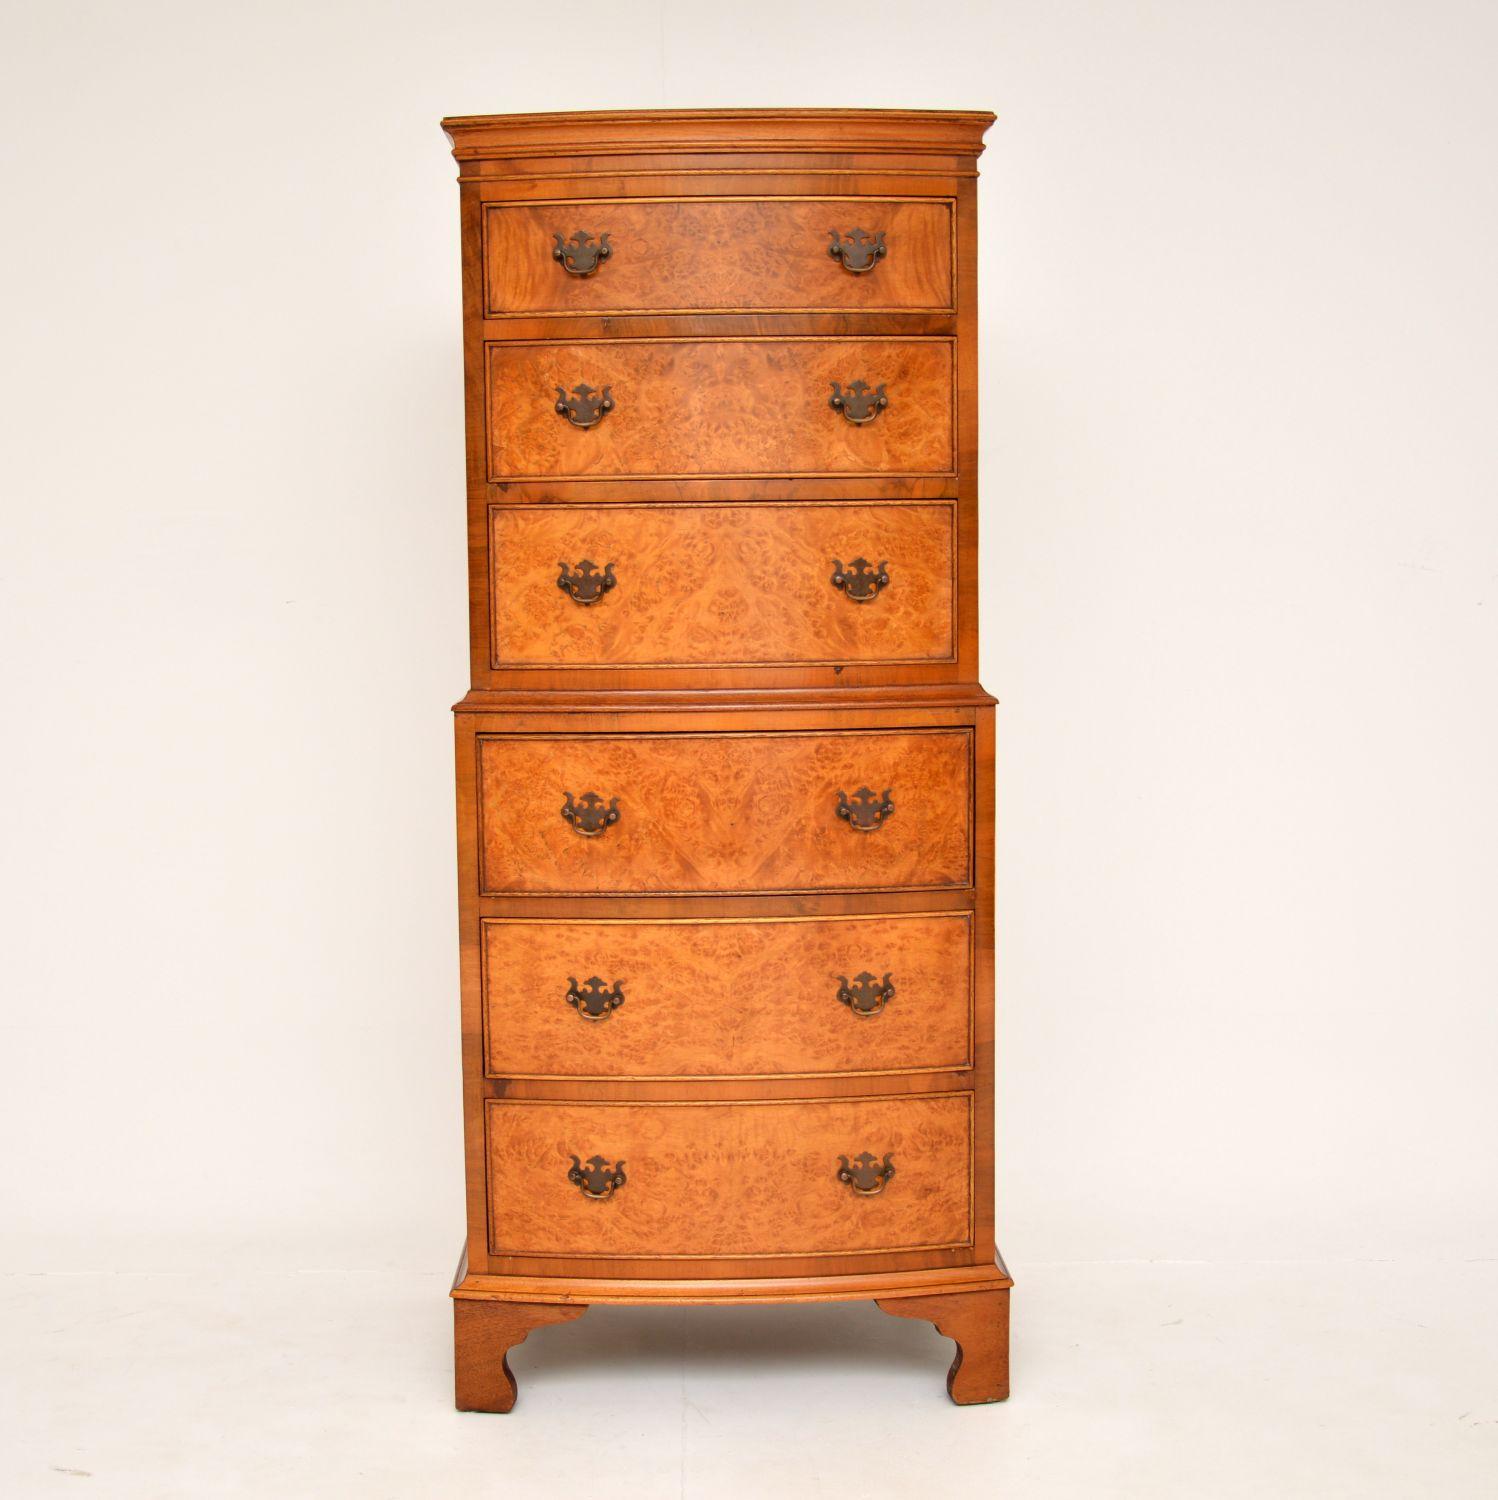 A beautiful antique burr walnut chest on chest of drawers. This was made in England, it dates from around the 1930’s.

It is of super quality and is a great size. Tall and slim, it doesn’t take up much floor space yet has plenty of storage space